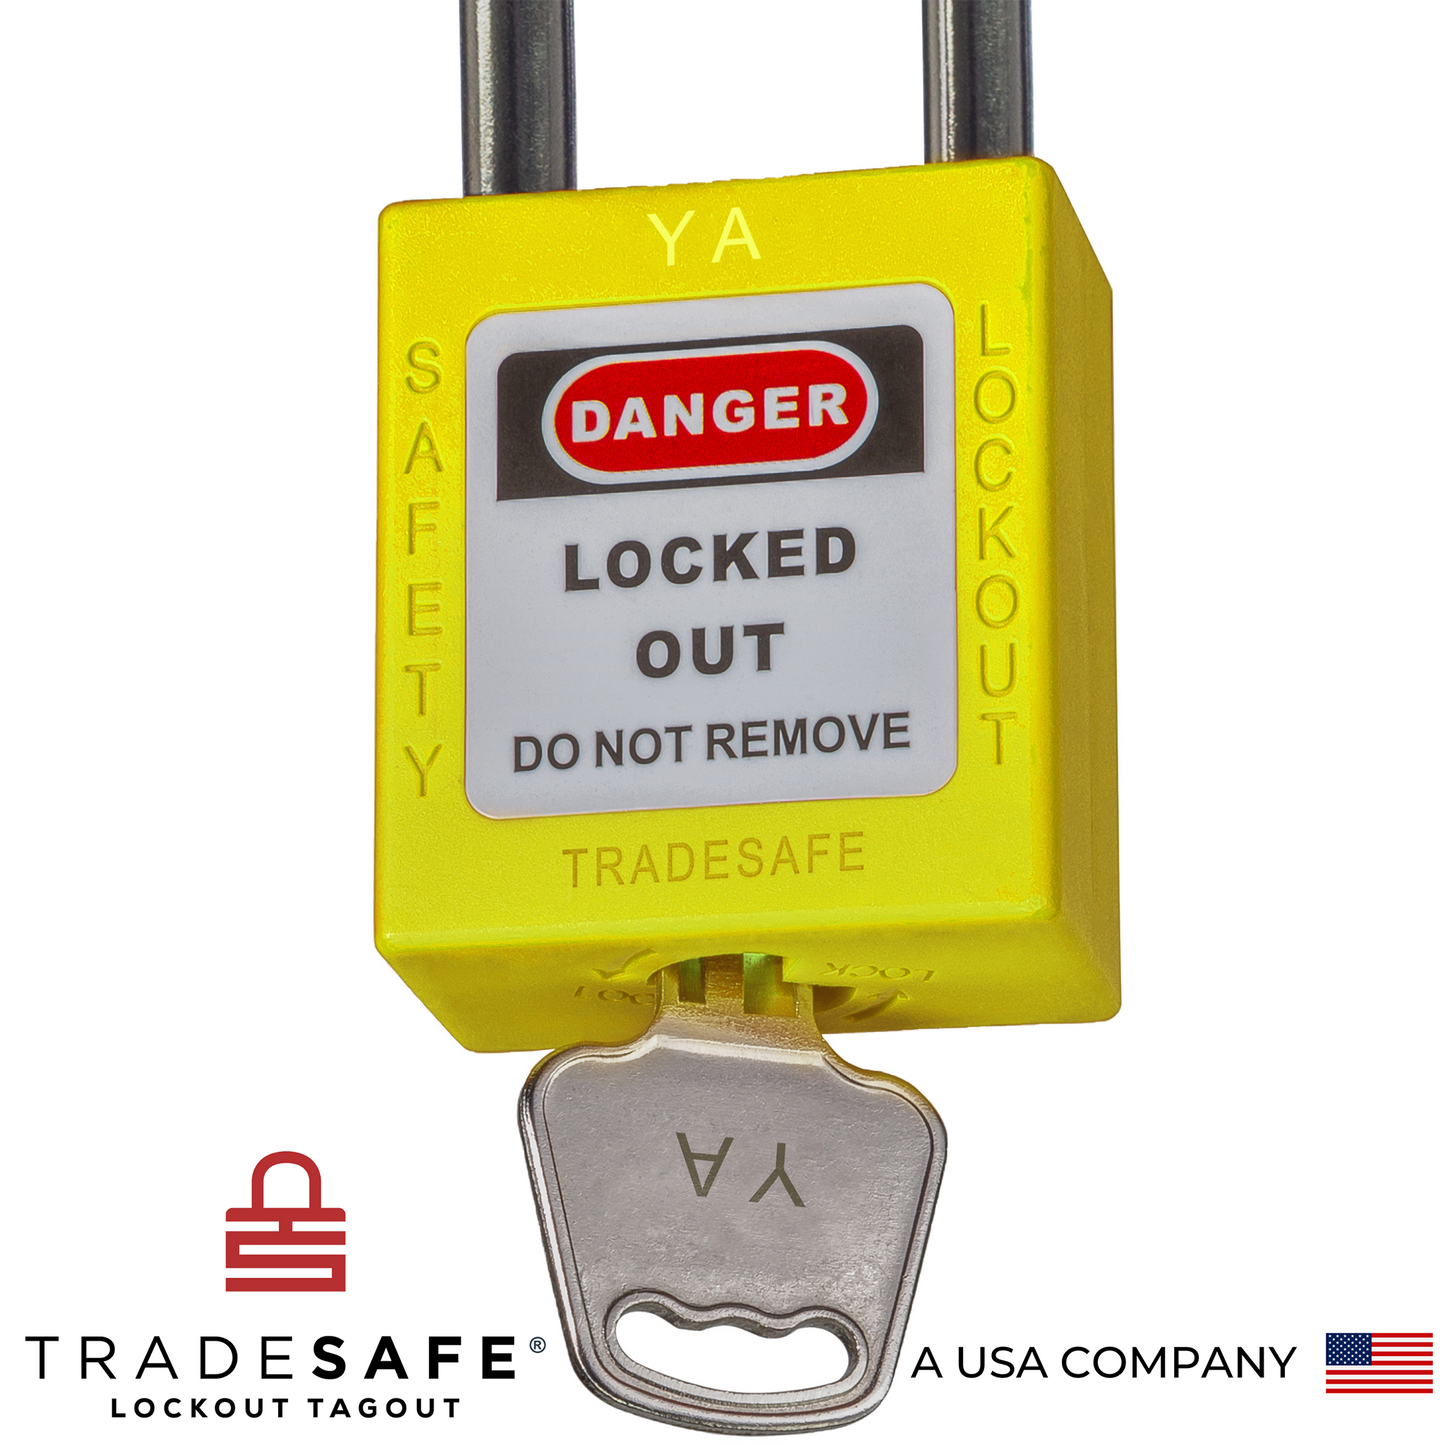 a close-up view of a yellow loto padlock's body with a key inserted